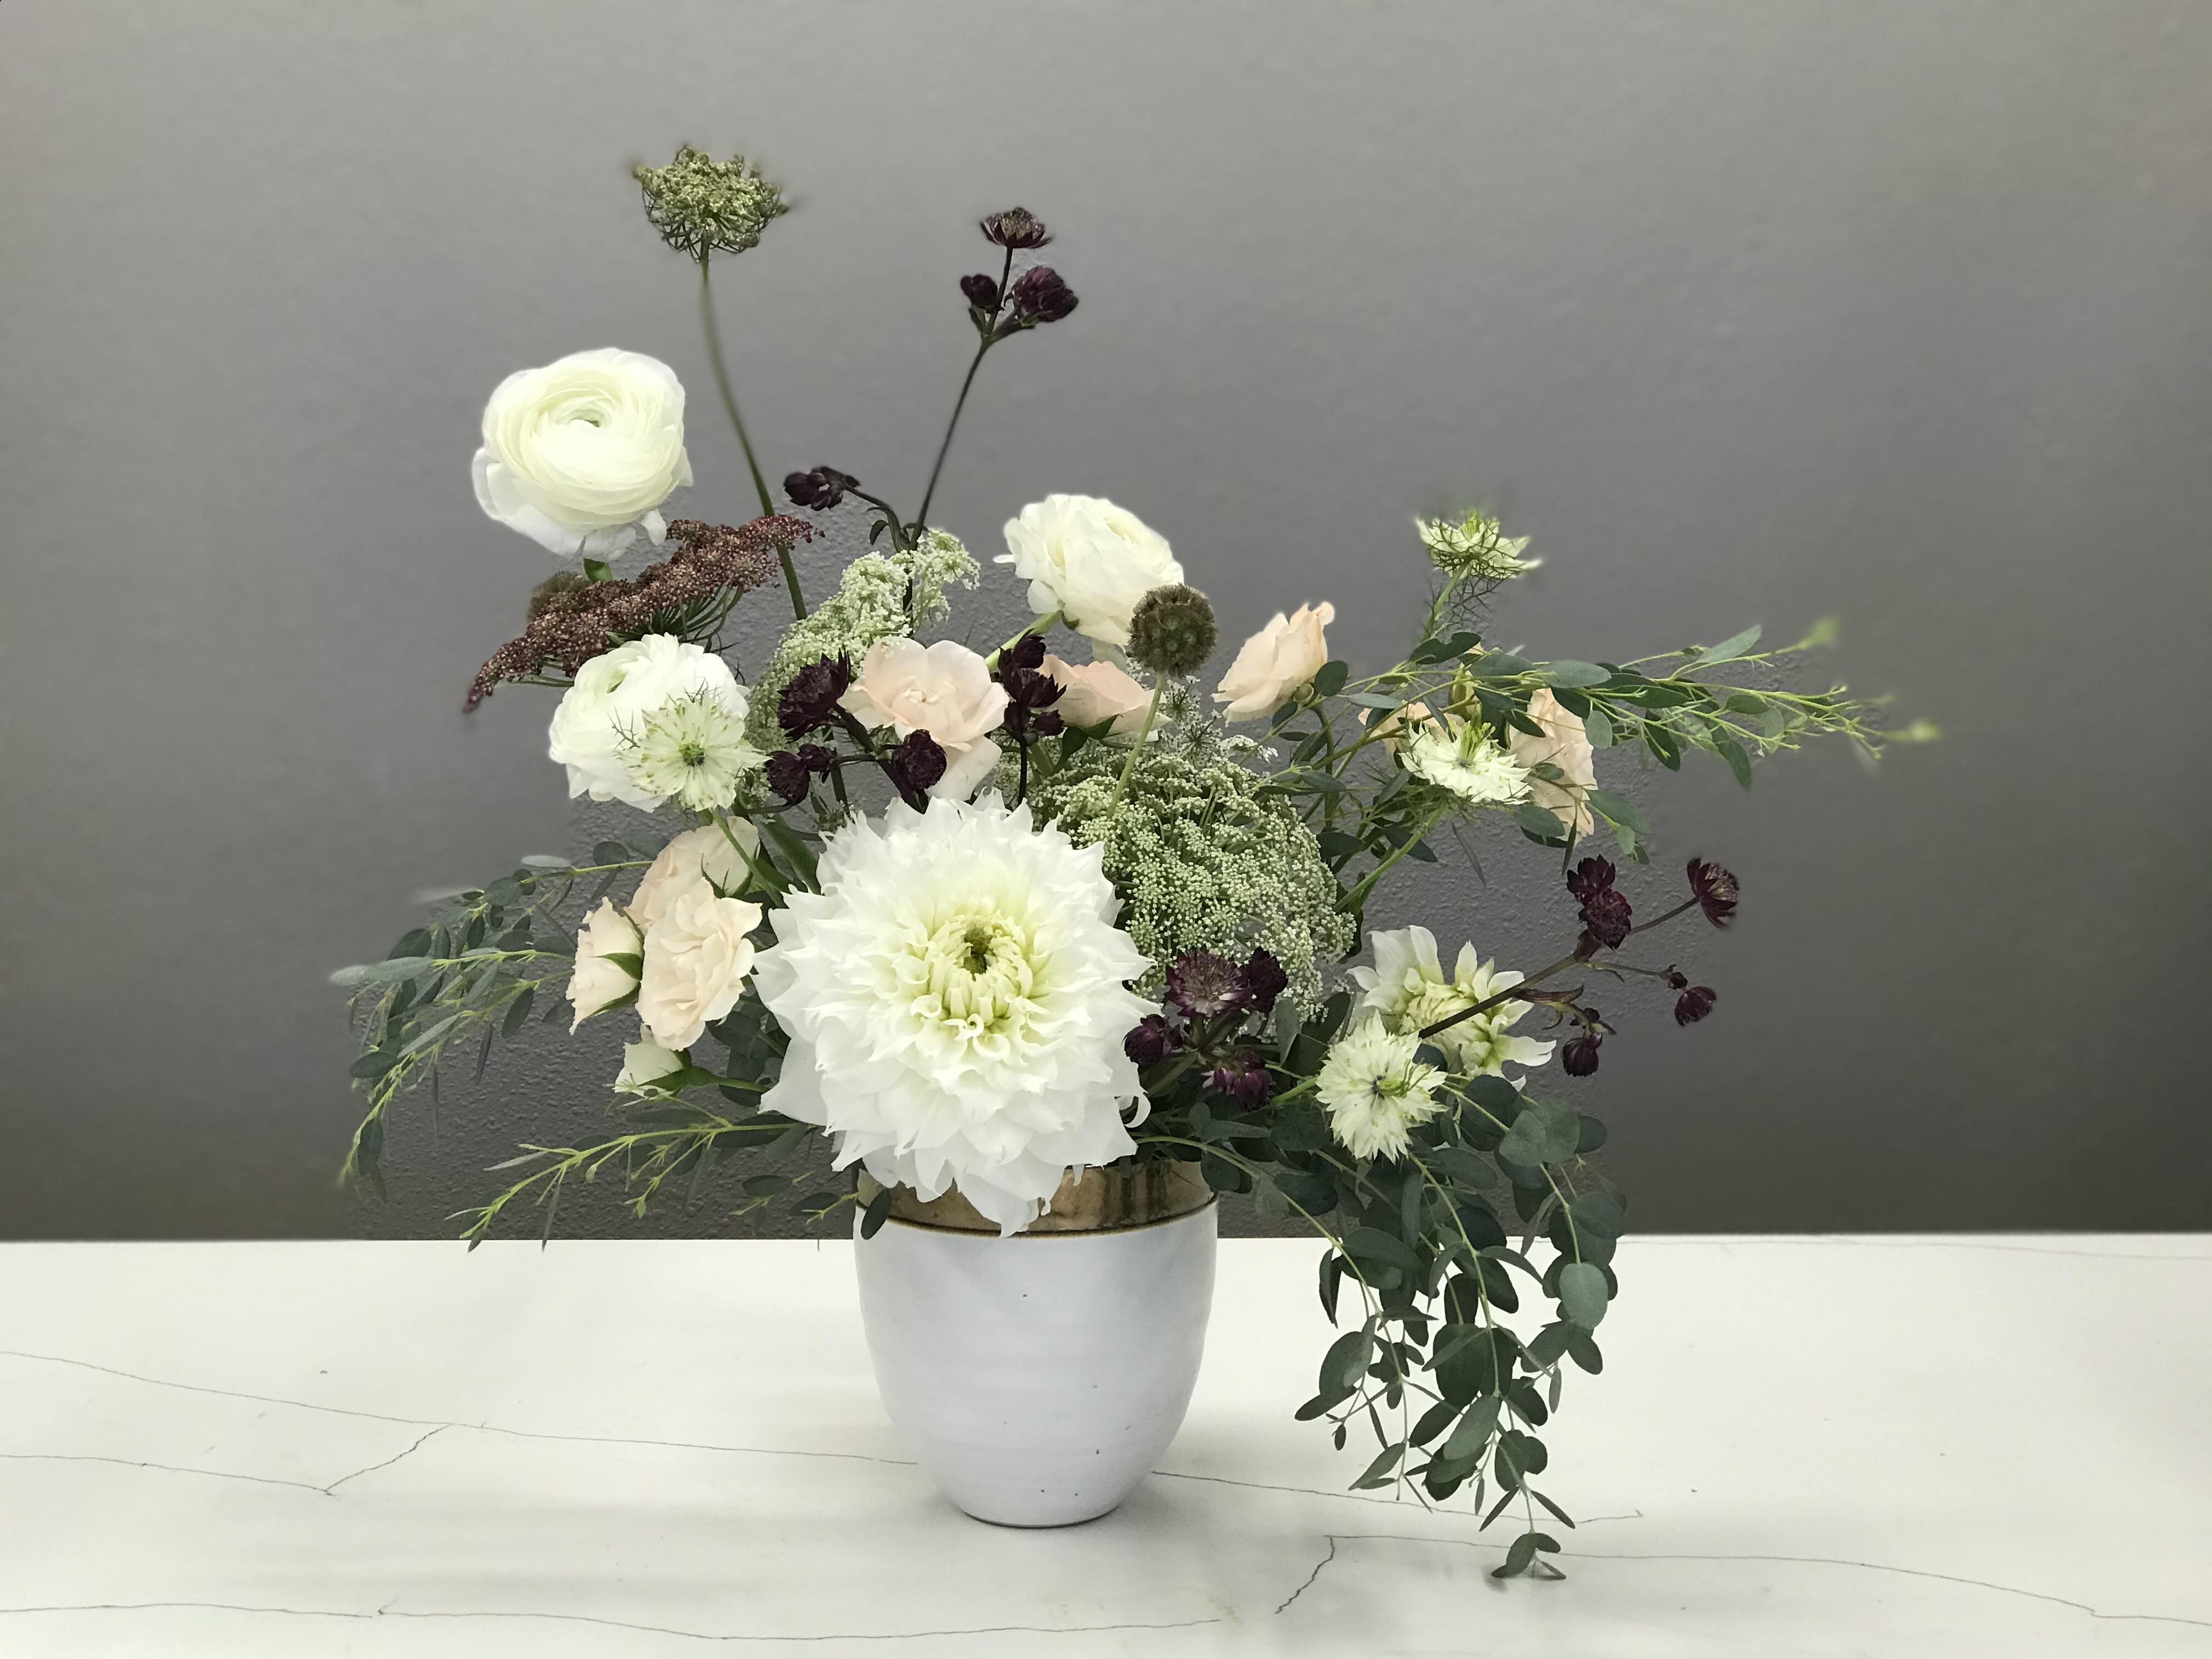 Emphatically Yours - Designed for the unique love in your life- celebrate them with this elegantly arranged floral hug featuring premium blooms. 